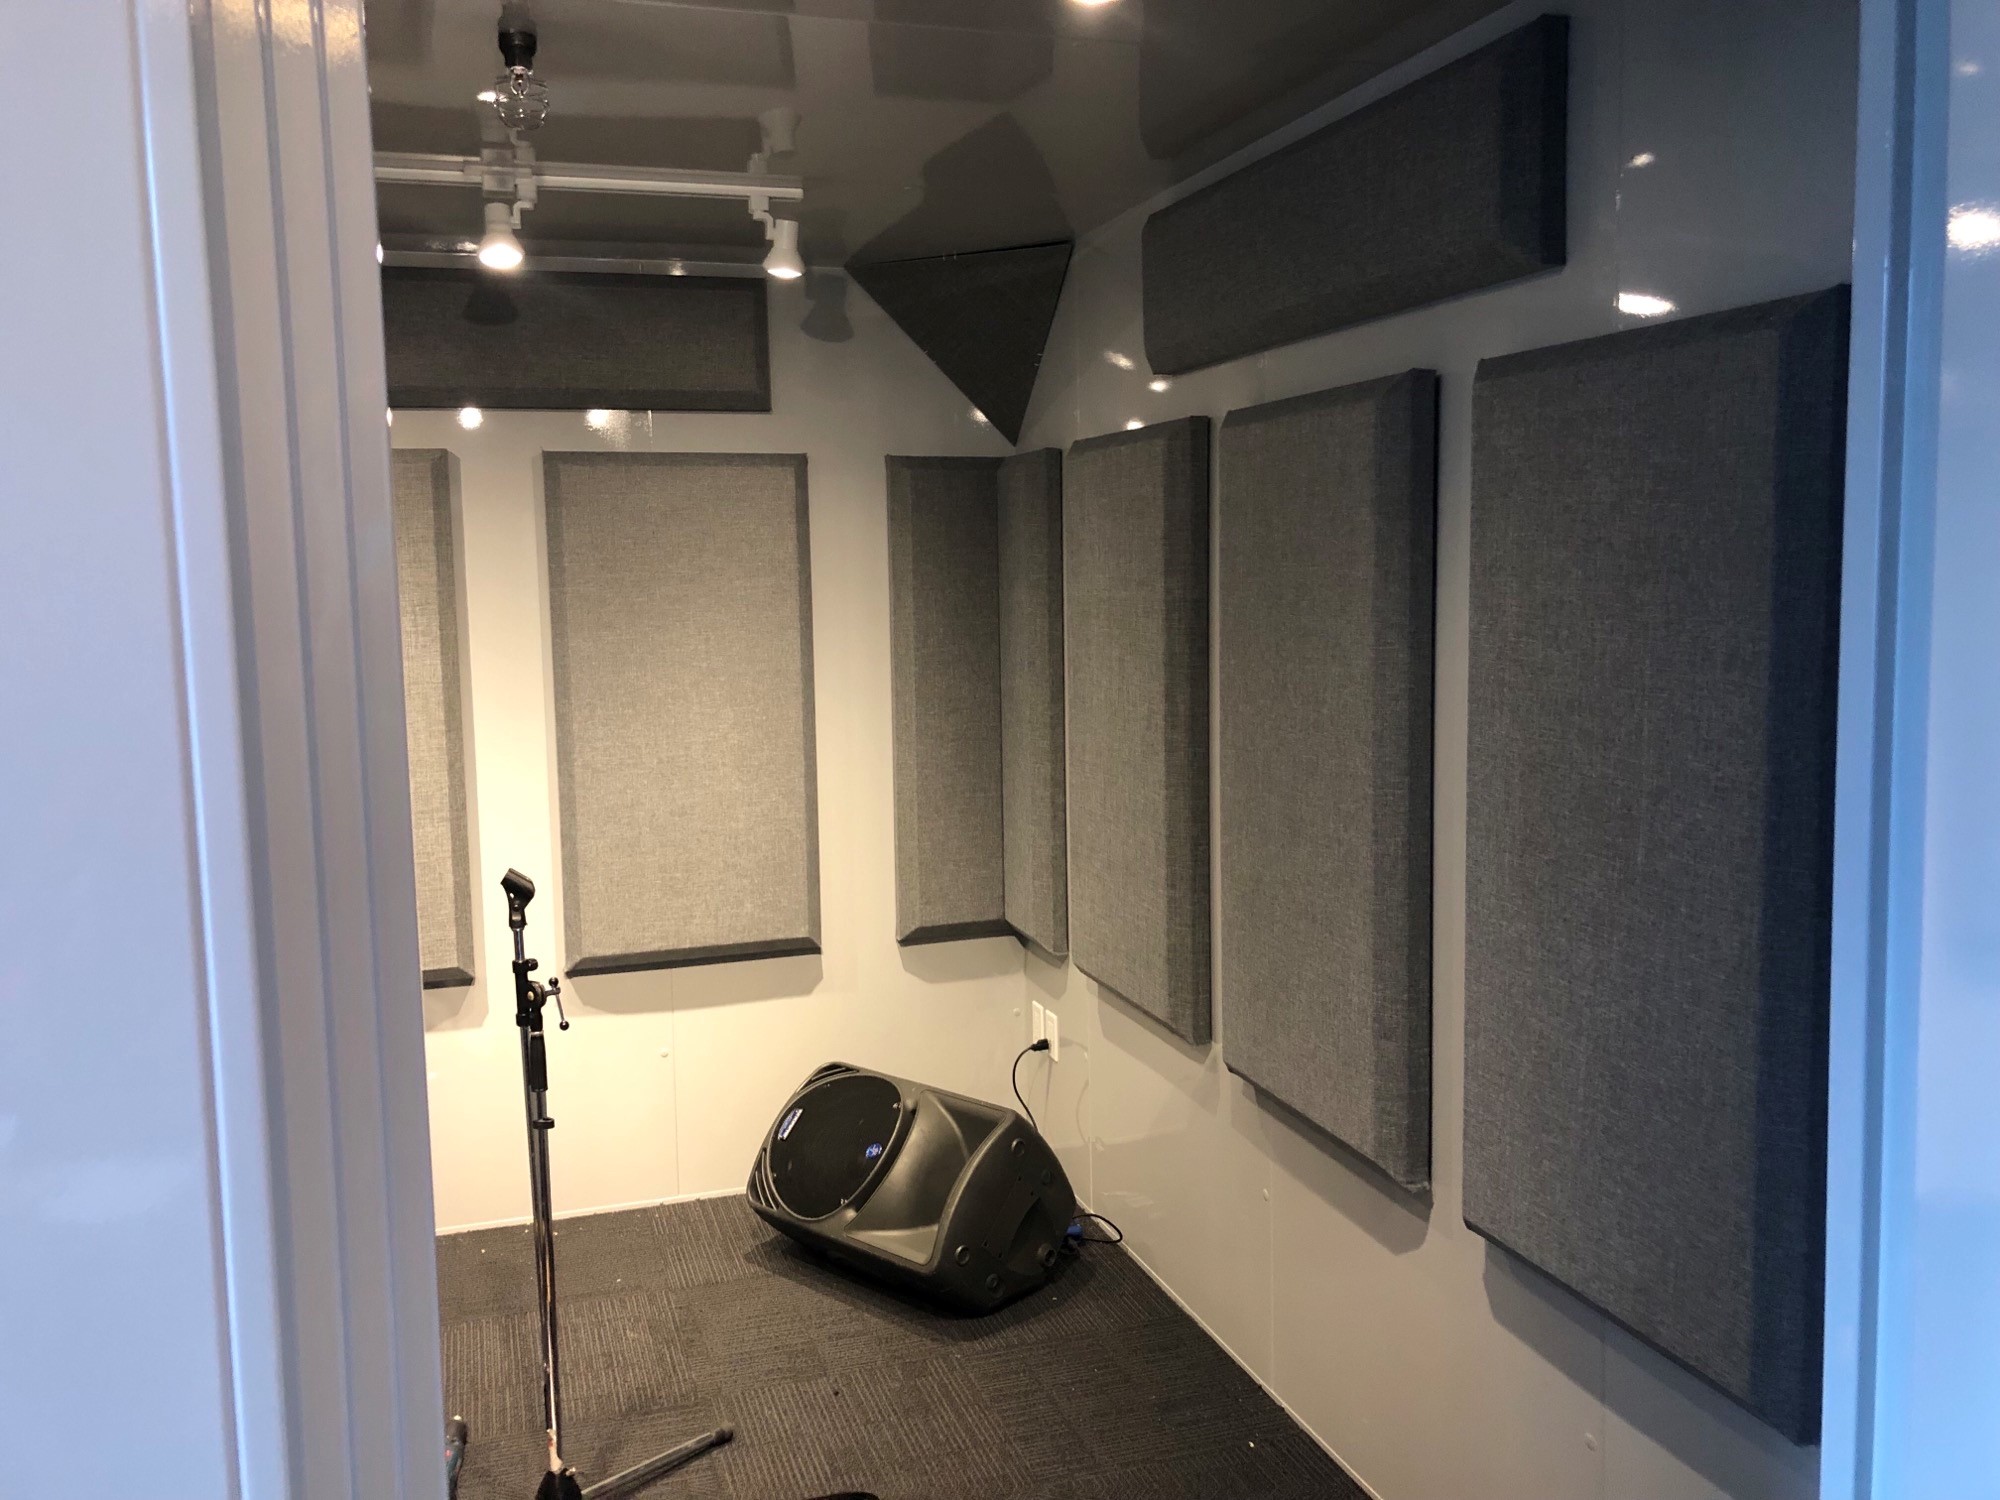 Recording Booth for a Sound Studio – Center for Digital Arts